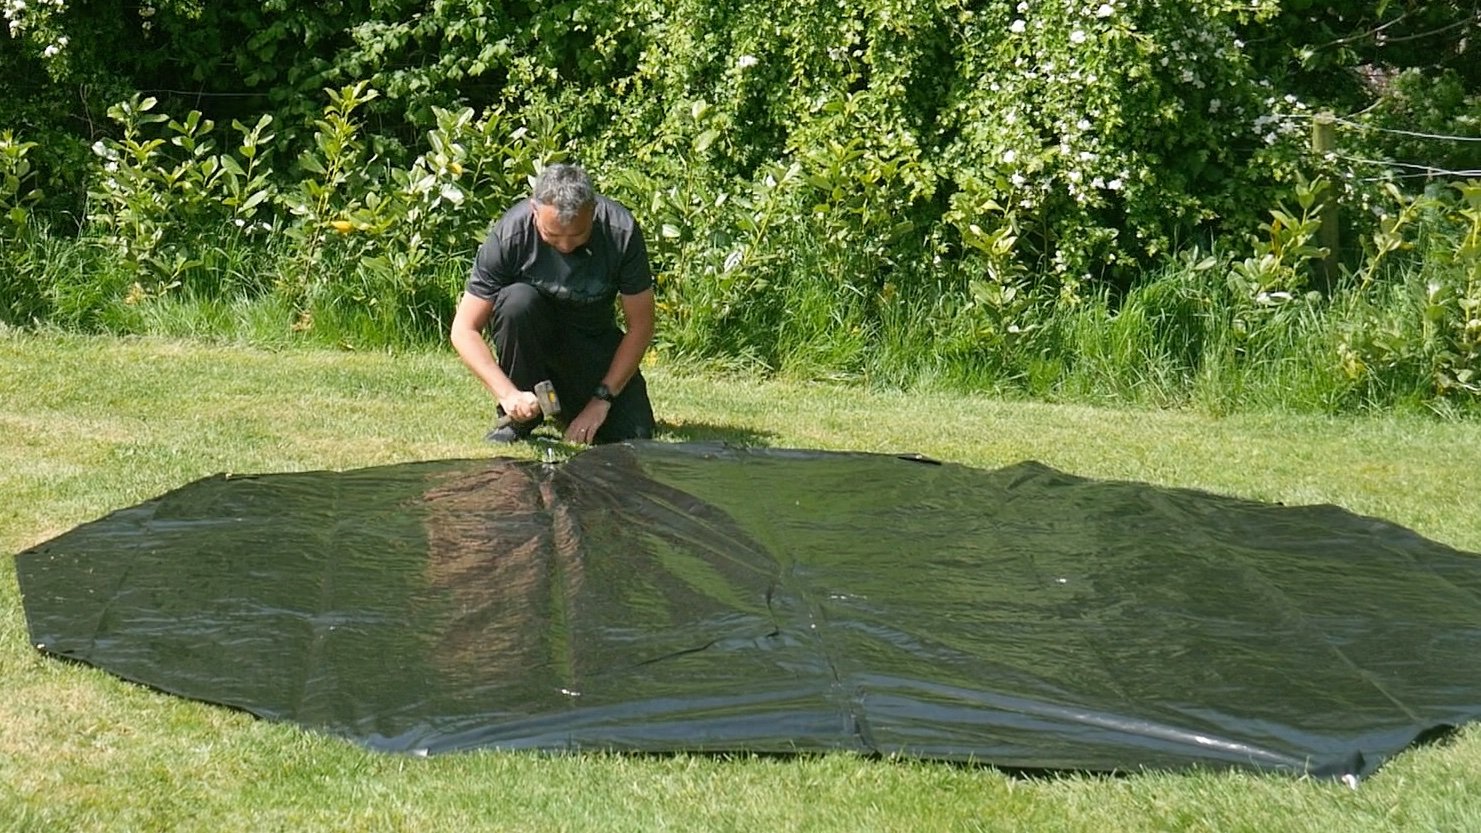 Pitching the tent footprint